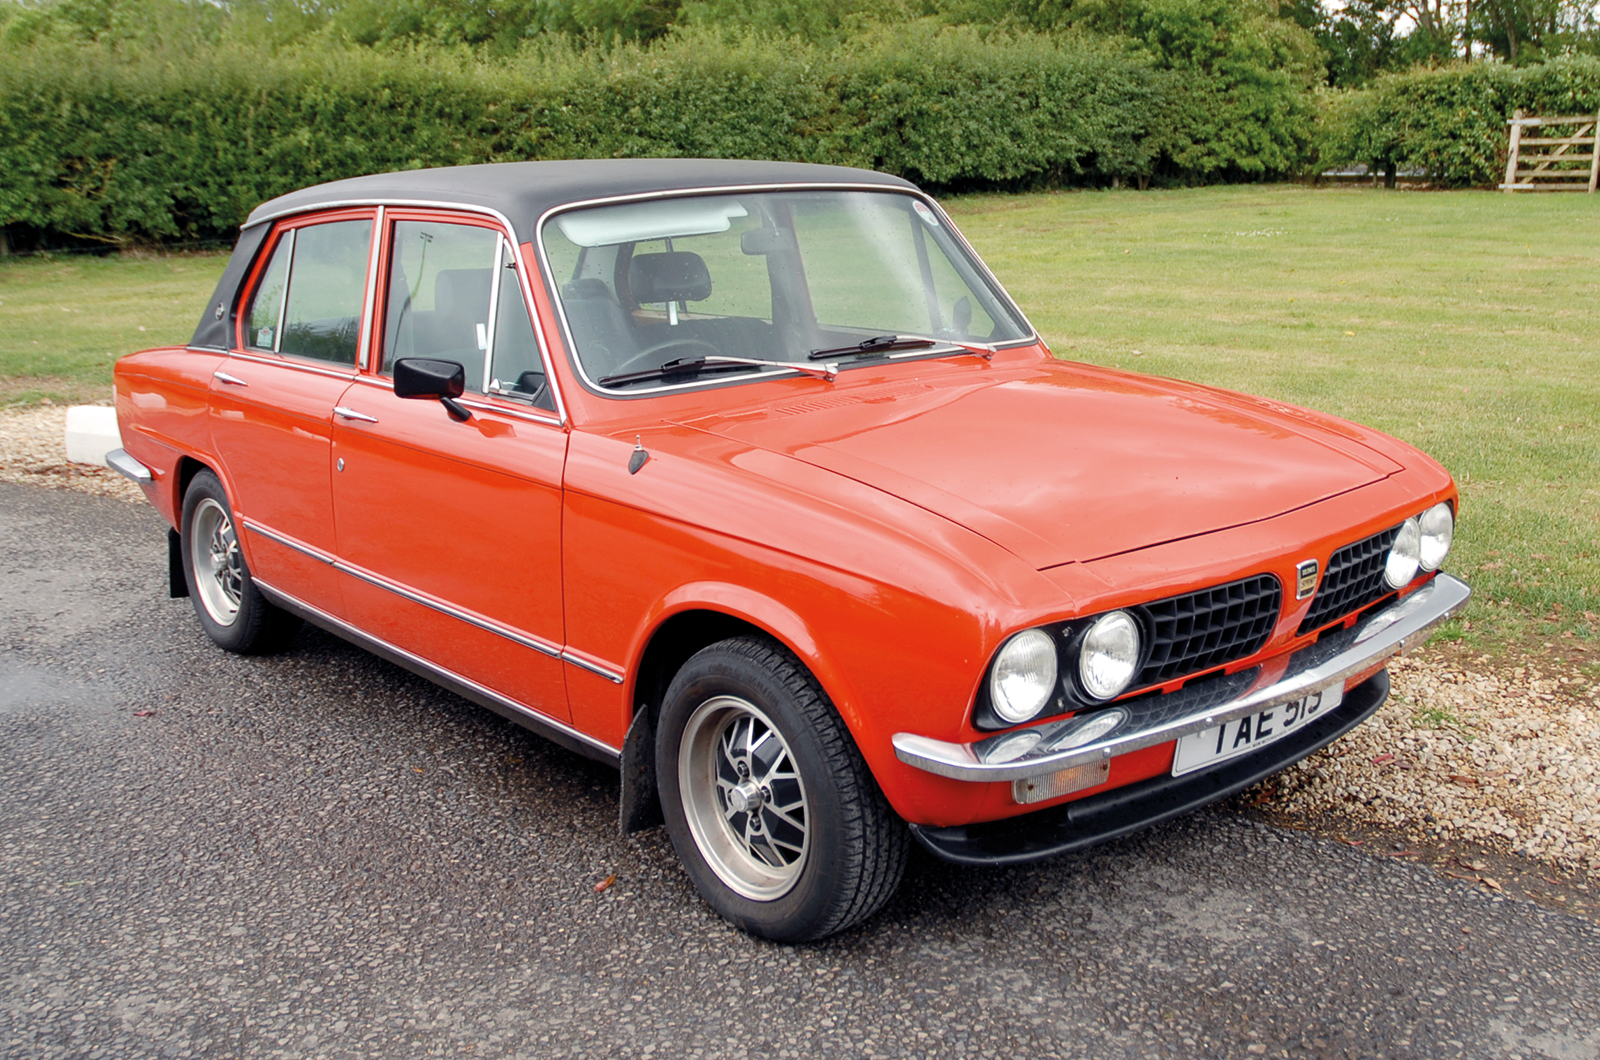 Classic & Sports Car – Buyer’s guide: Rootes’ Arrow range